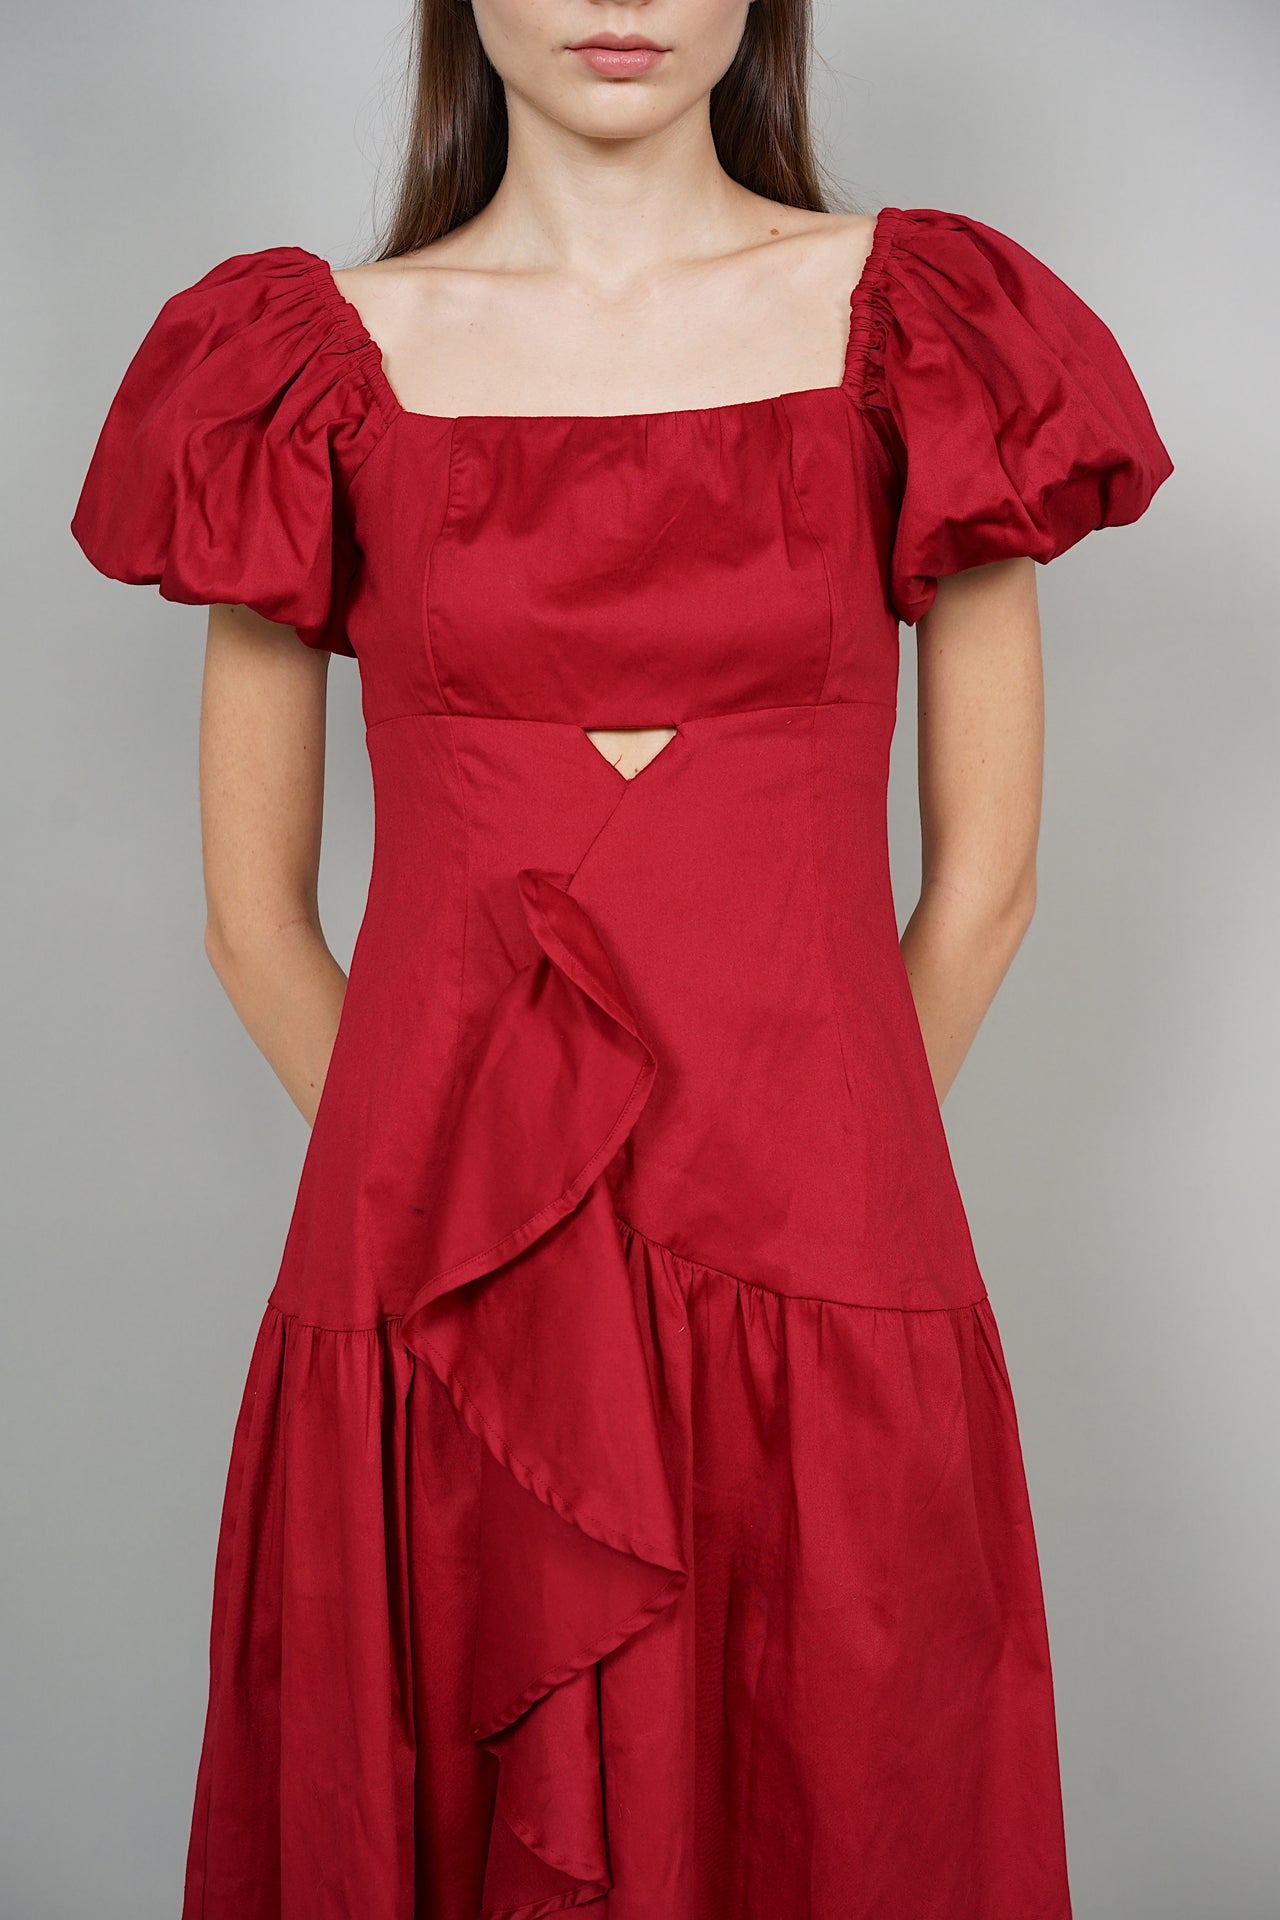 Syphon Frill Midi Dress in Red